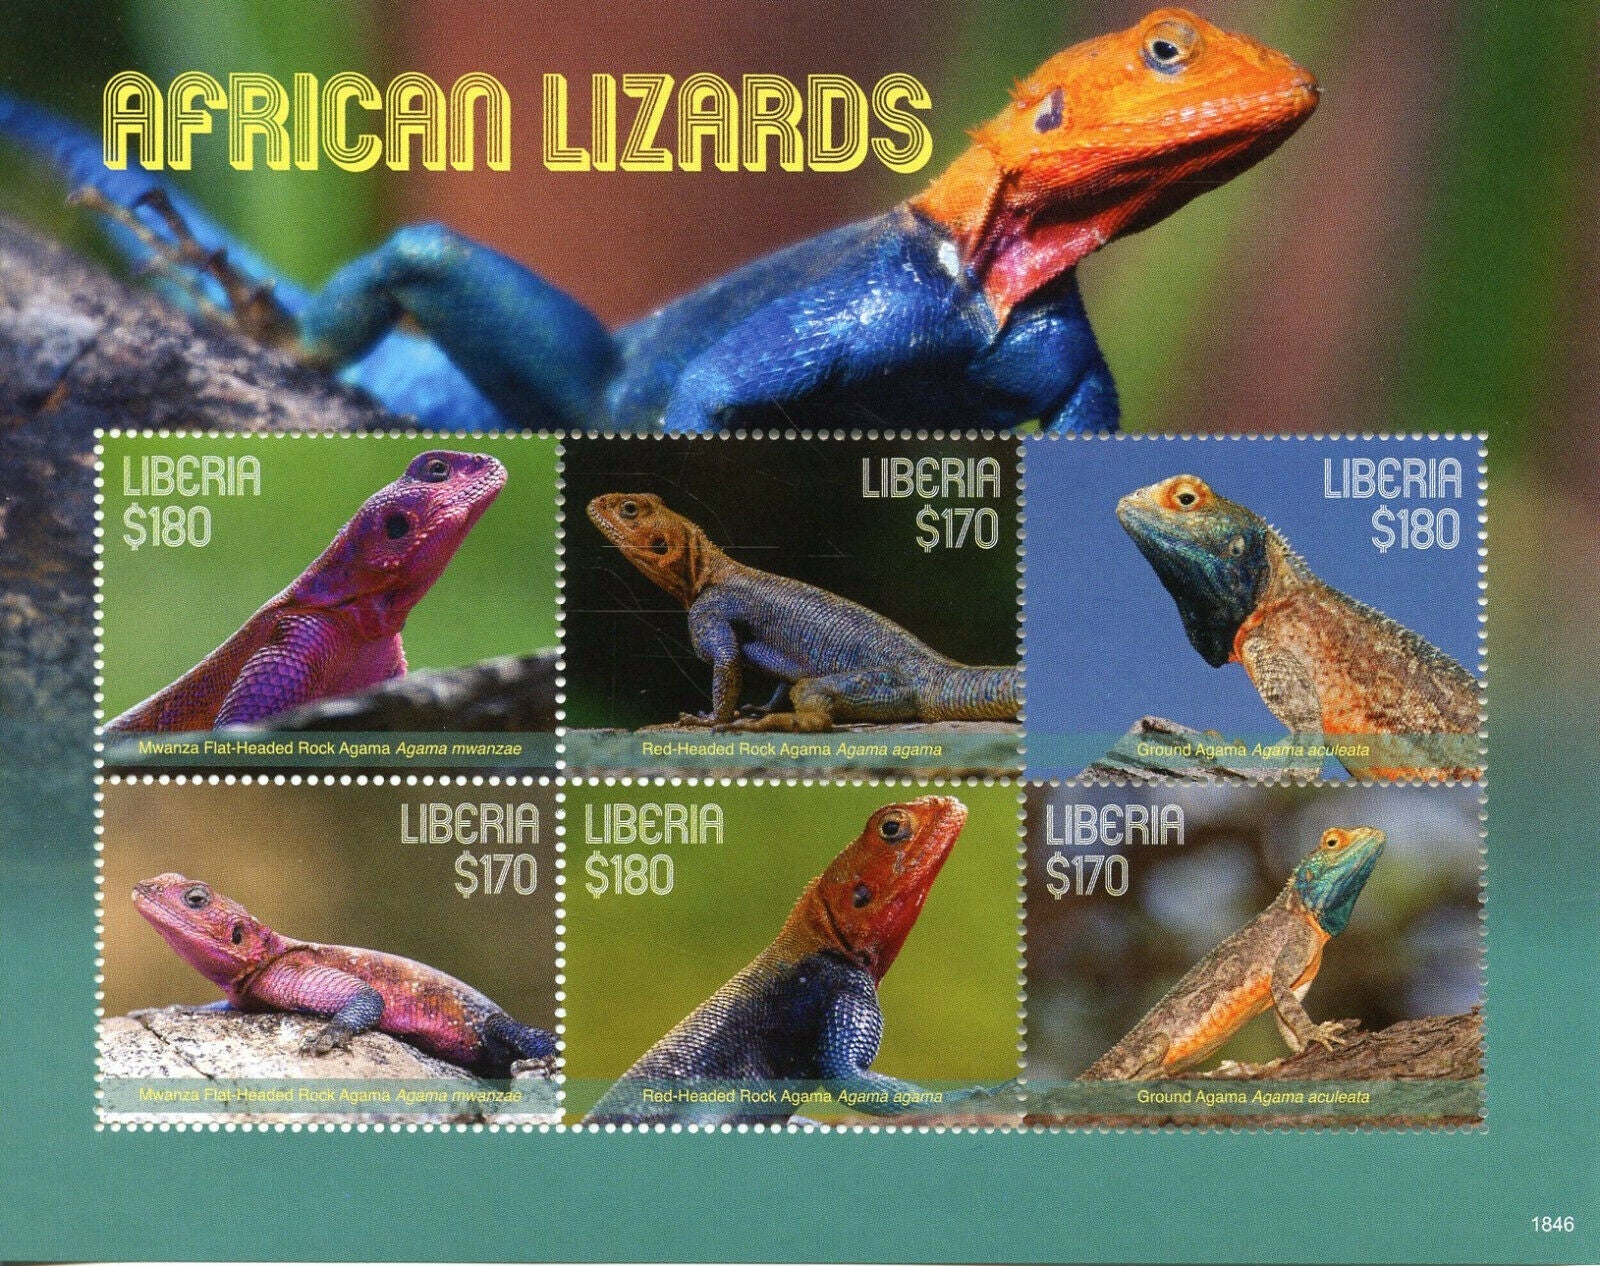 Liberia 2018 MNH Reptiles Stamps African Lizards Rock Ground Agama 6v M/S